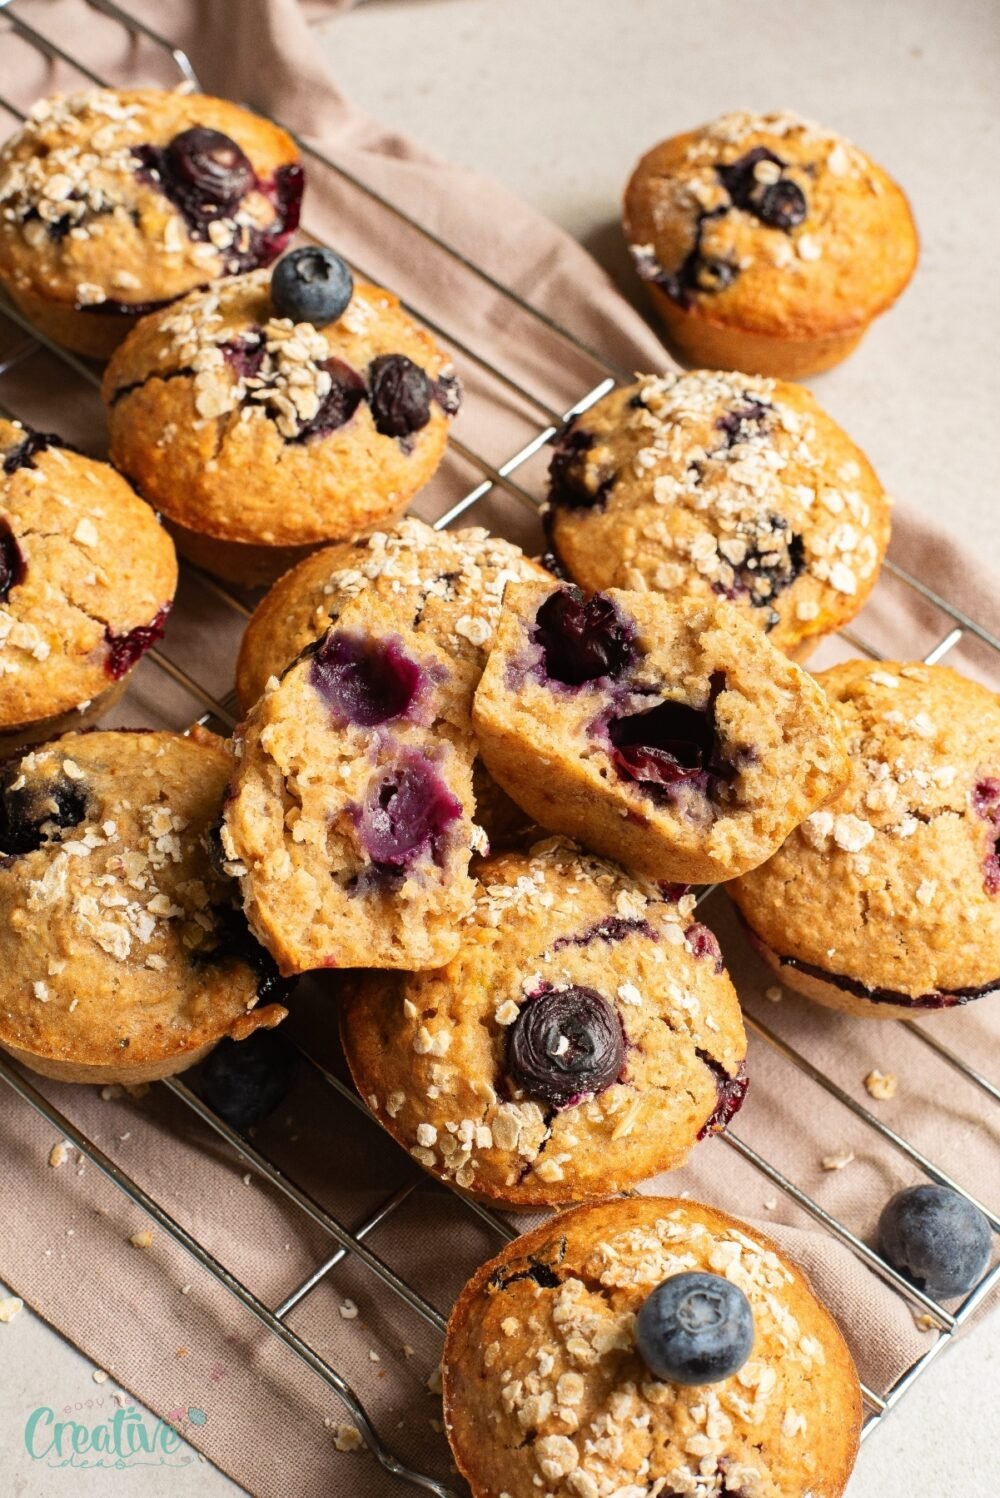 Deliciously moist whole wheat banana blueberry muffins: a healthier treat packed with fiber and nutrients. Upgrade your breakfast or snack!